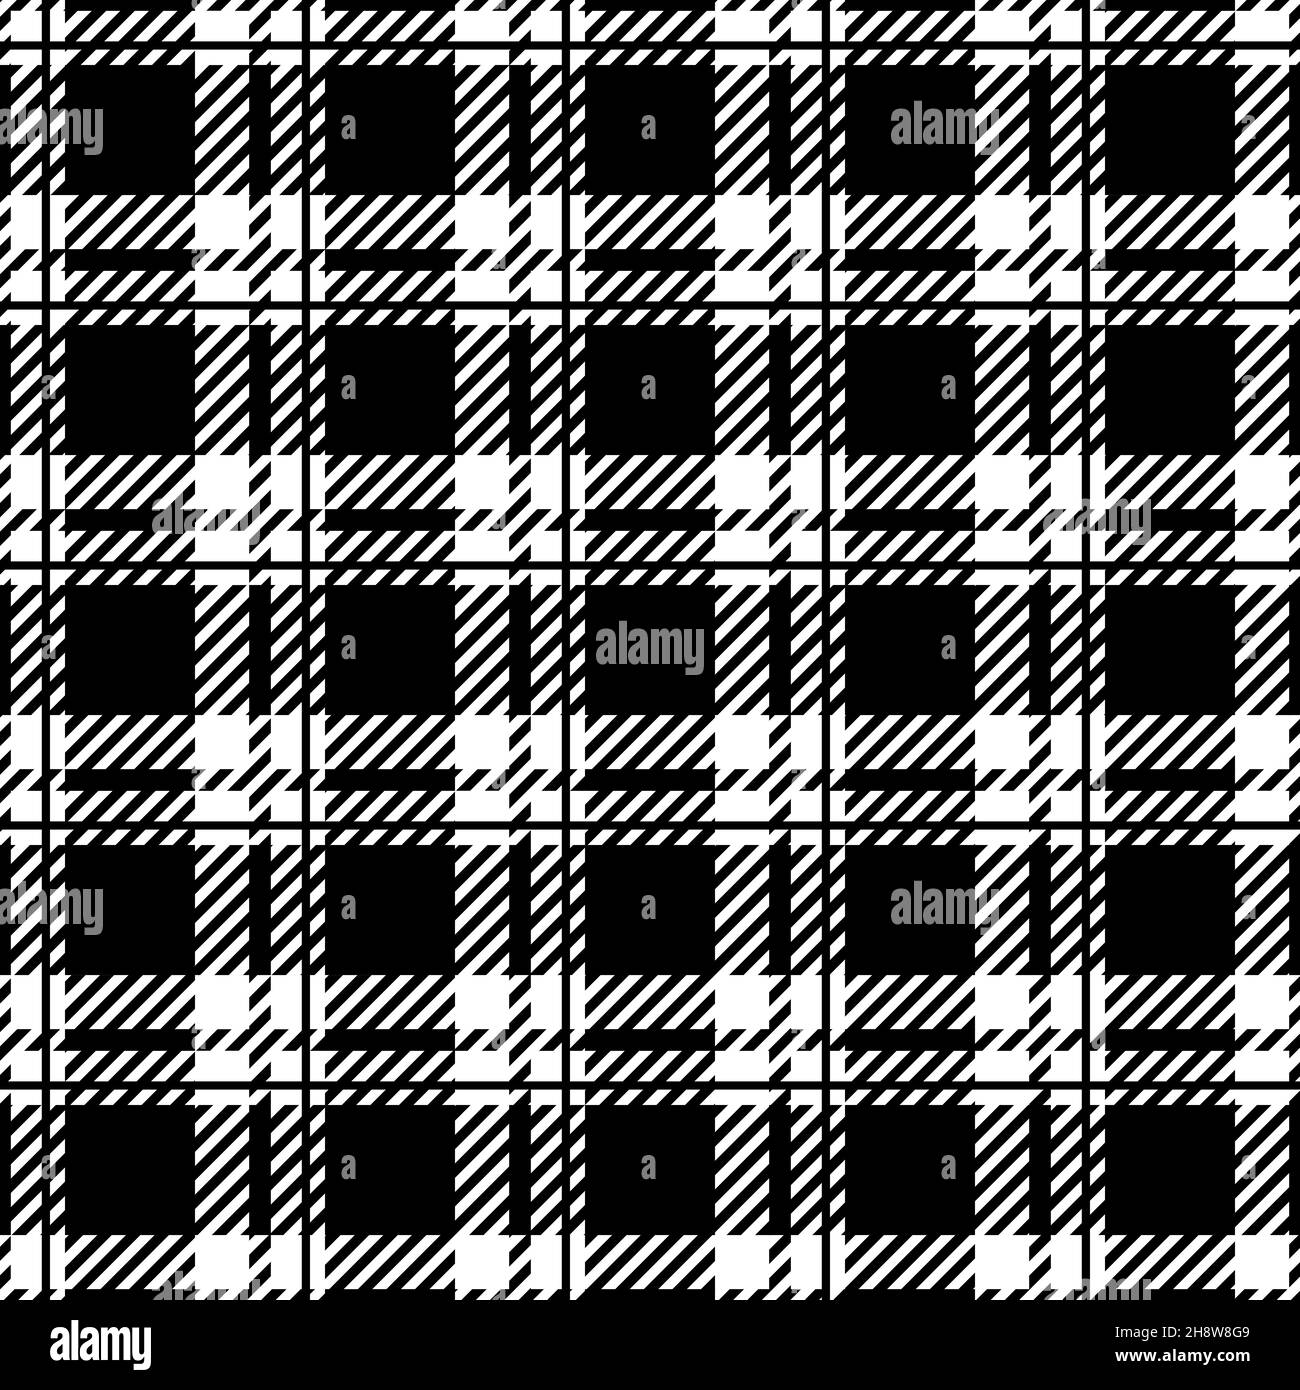 Black and White Plaid, checkered, tartan seamless pattern suitable for fashion textiles and graphics Stock Vector